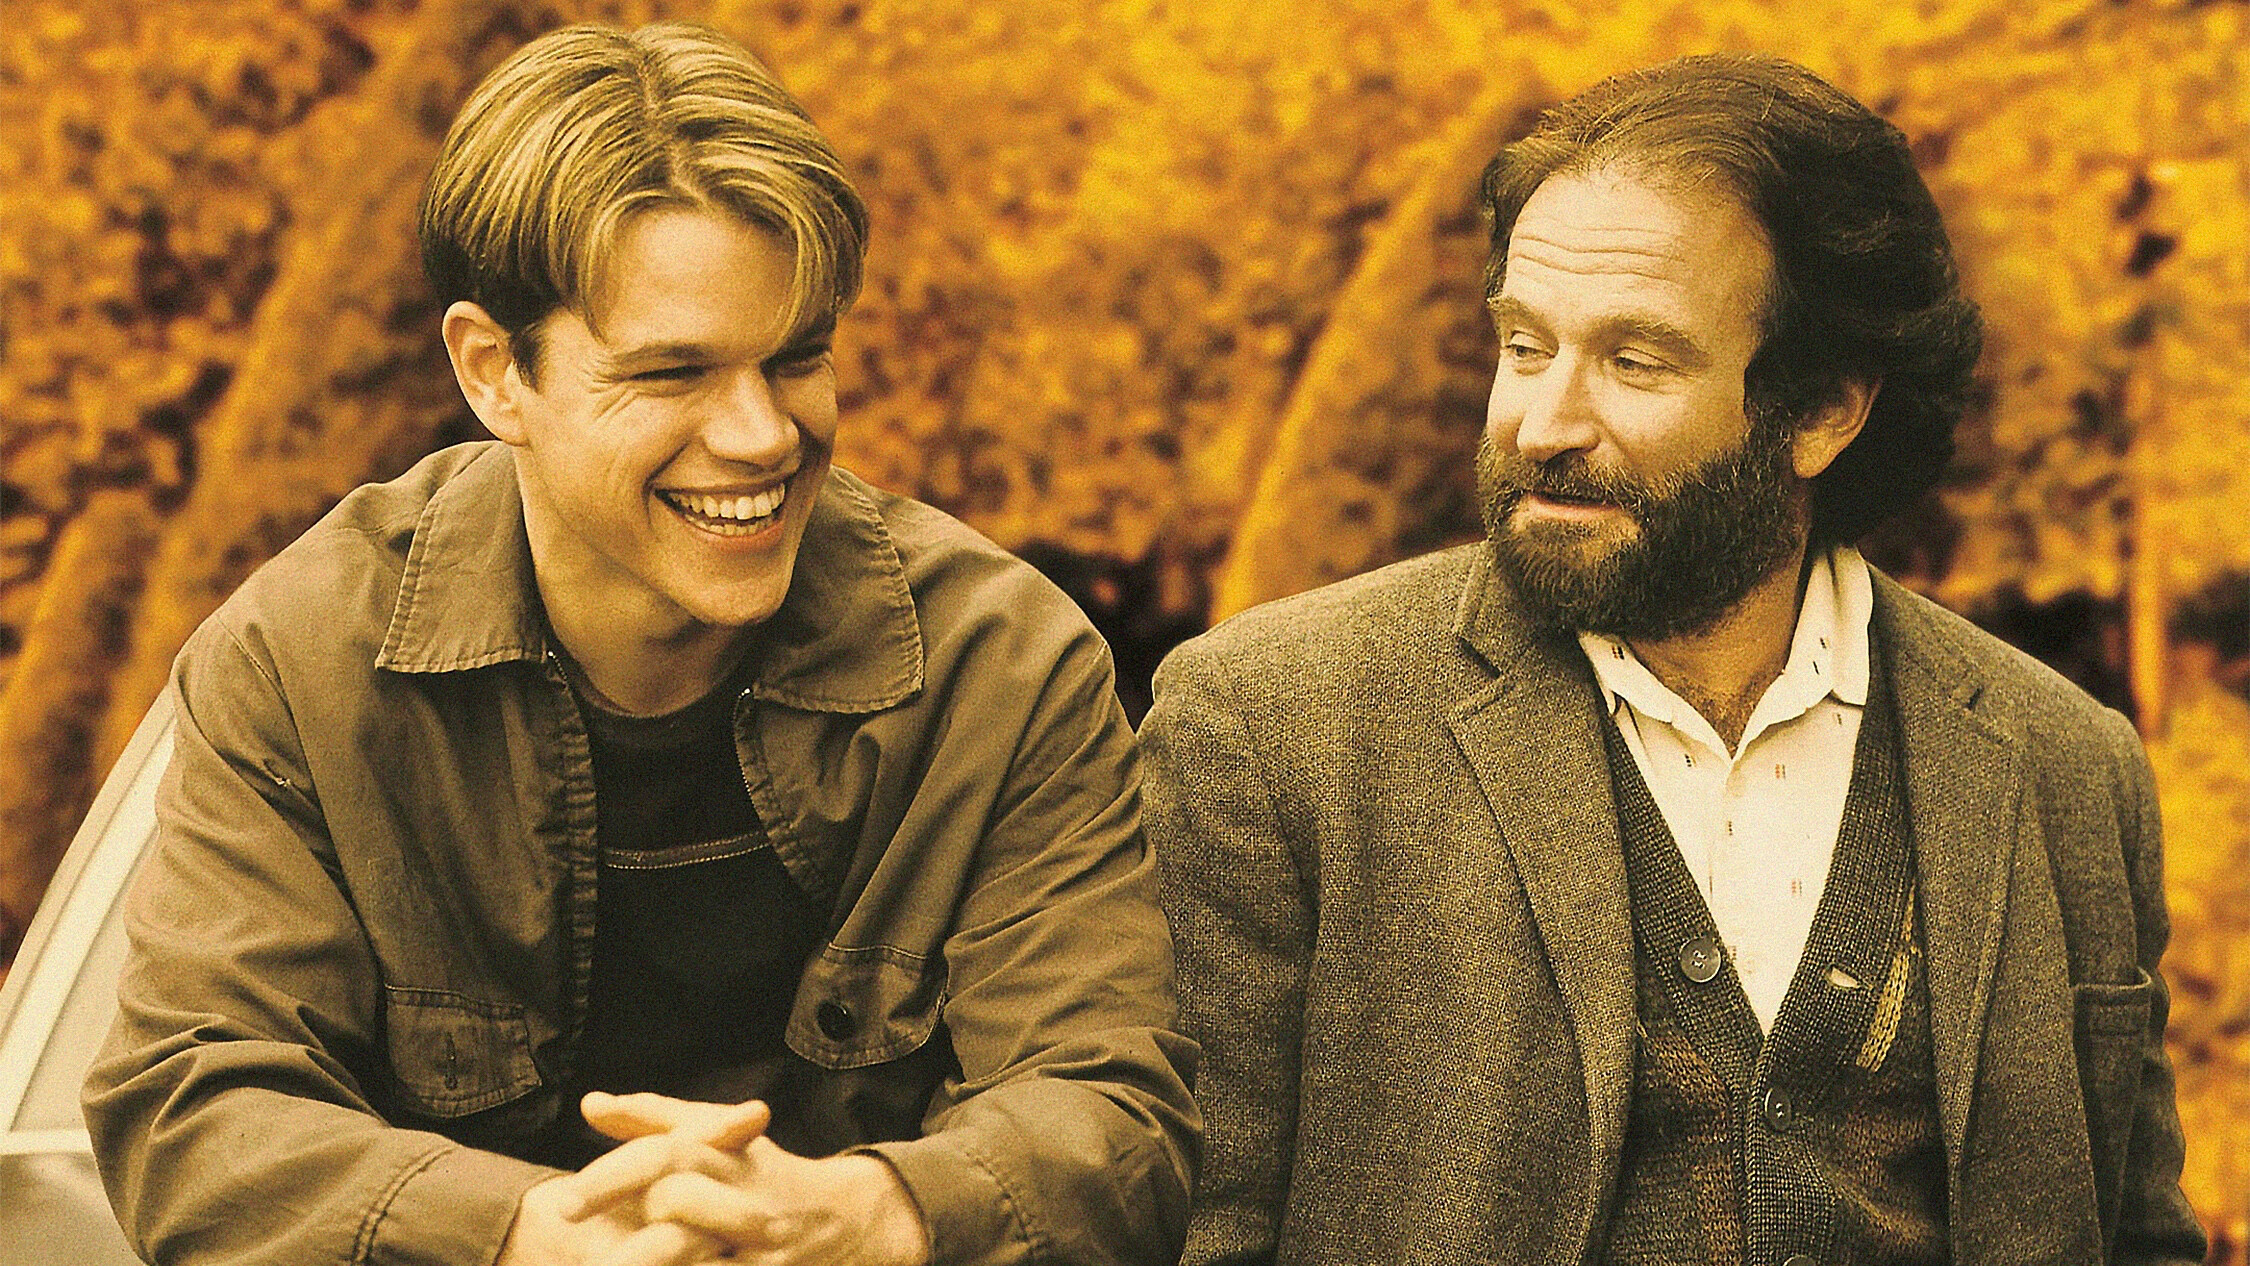 Good Will Hunting: The film grossed over $225 million during its theatrical run against a $10 million budget. 2250x1270 HD Wallpaper.